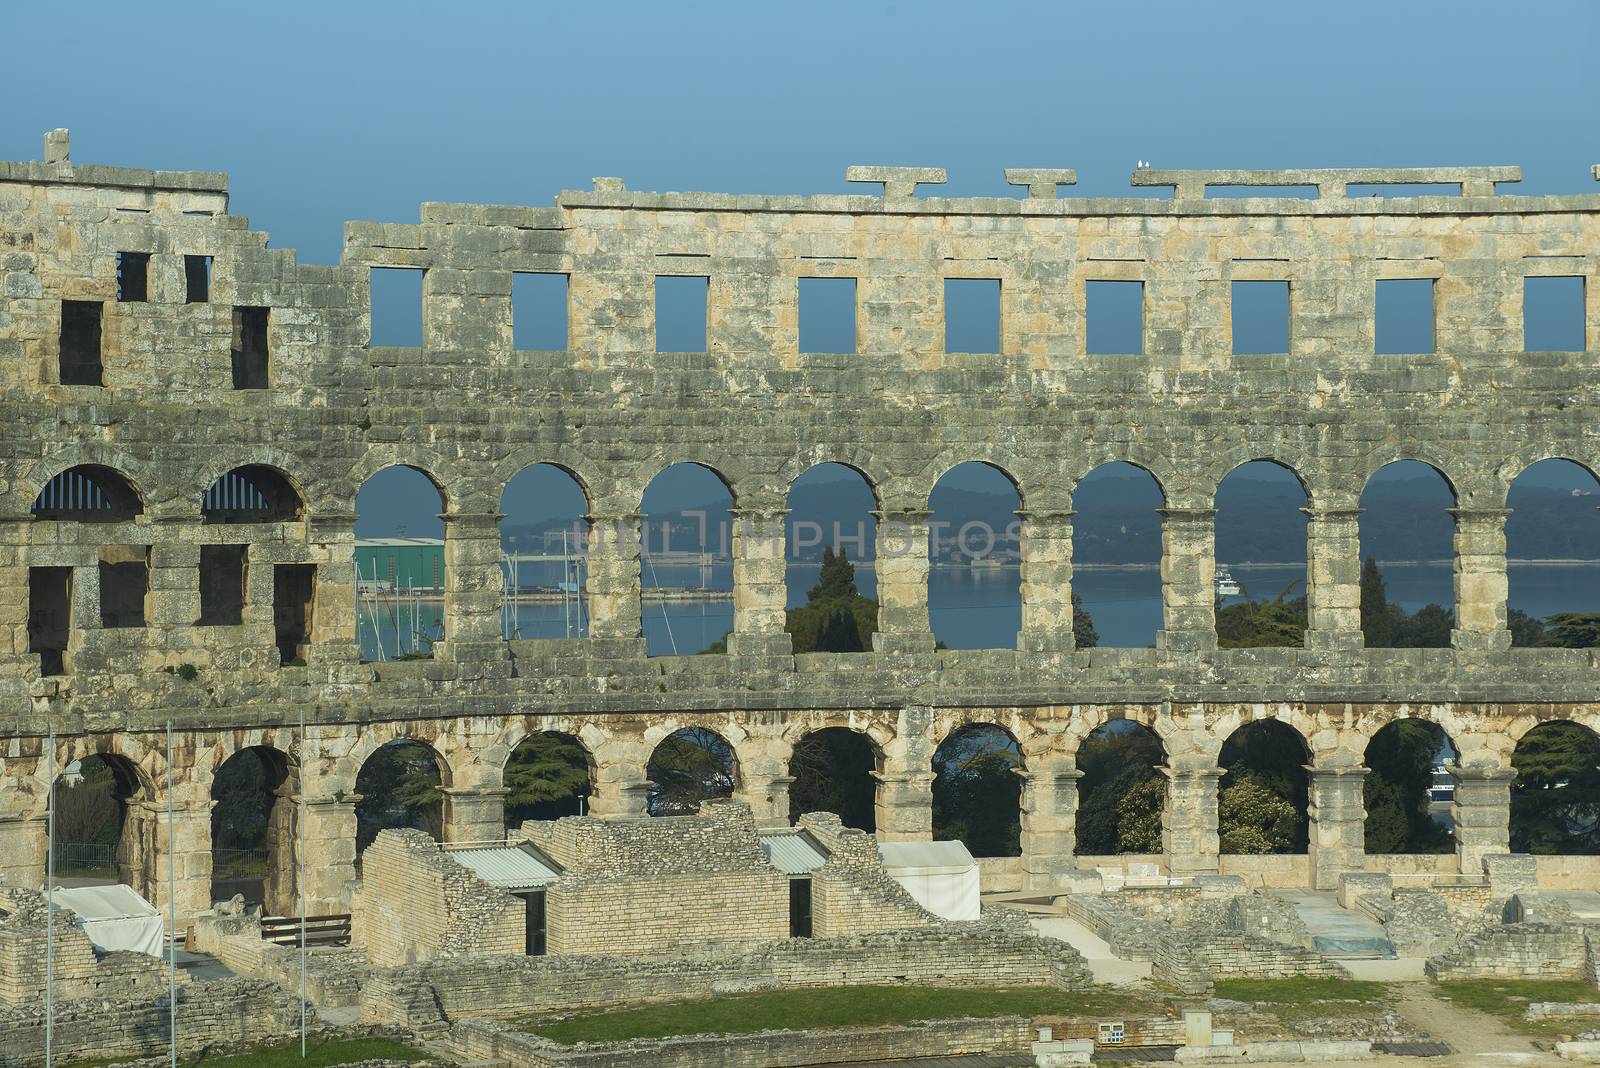 detail of the ancient Roman amphitheater in Pula, Croatia